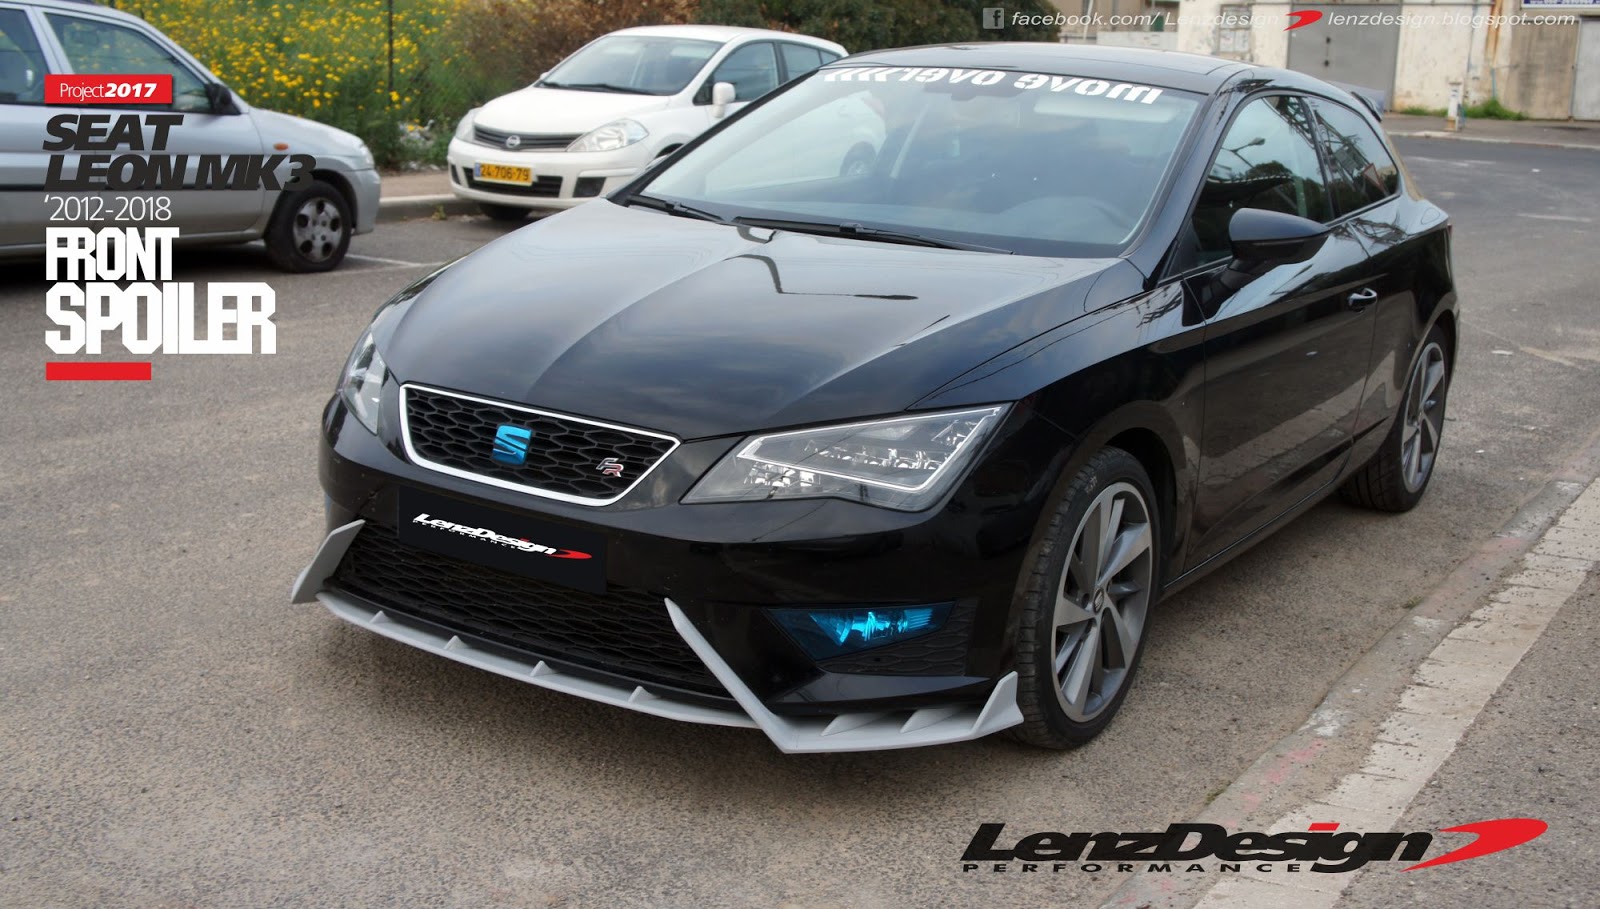 SEAT Leon 5F Body Kit from Lenzdesign Gets the Job Done - autoevolution